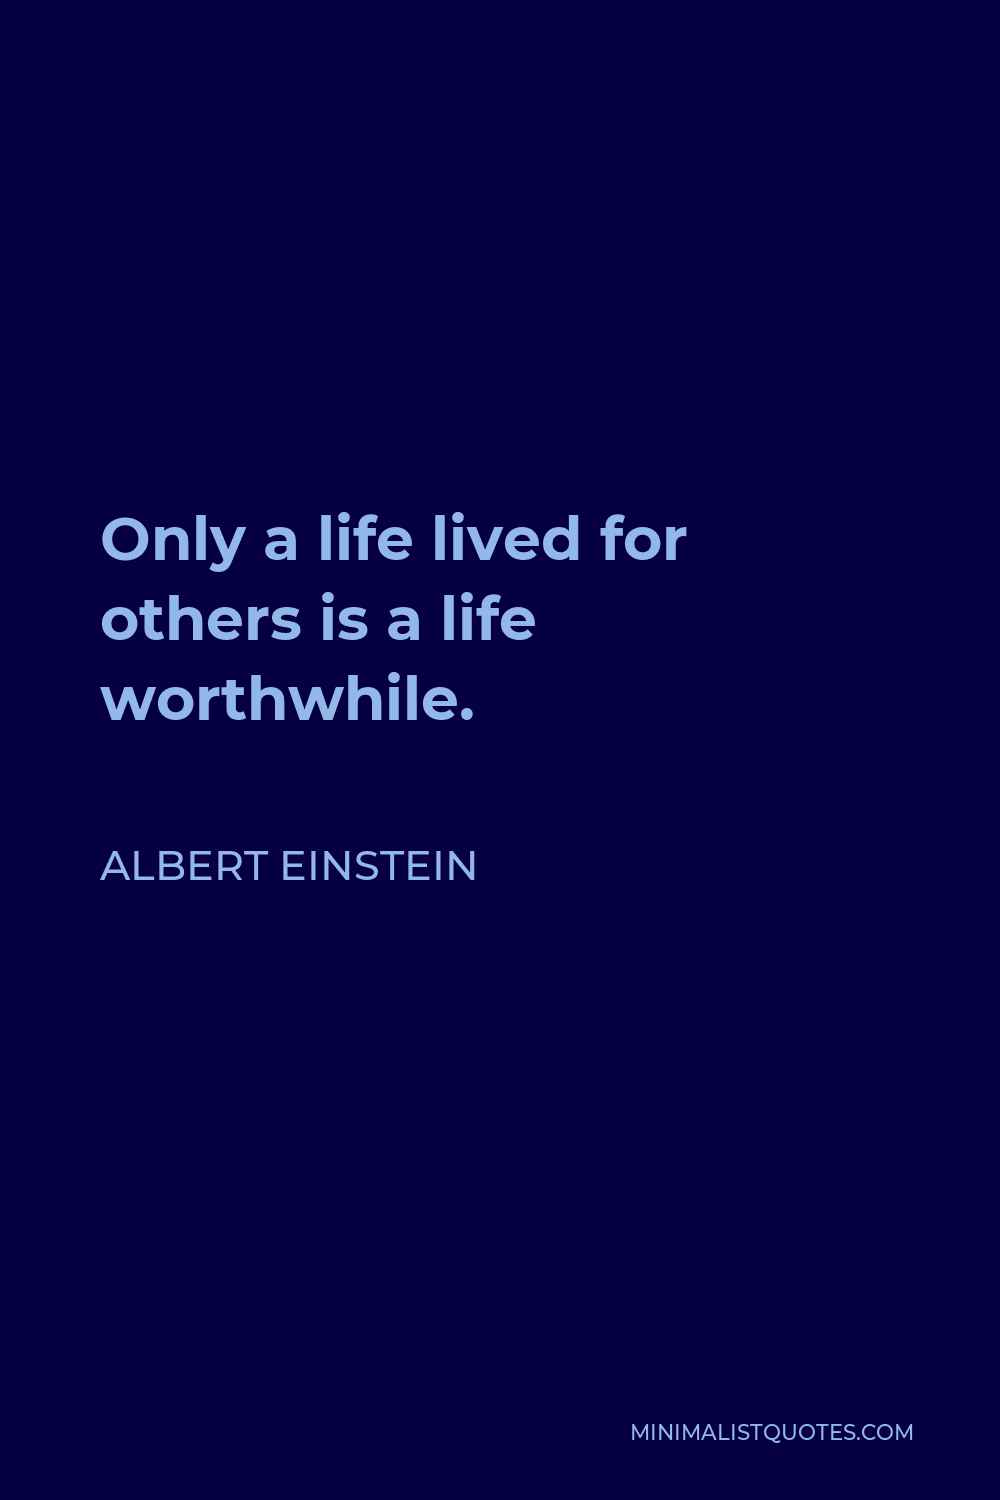 Albert Einstein Quote - Only a life lived for others is a life worthwhile.